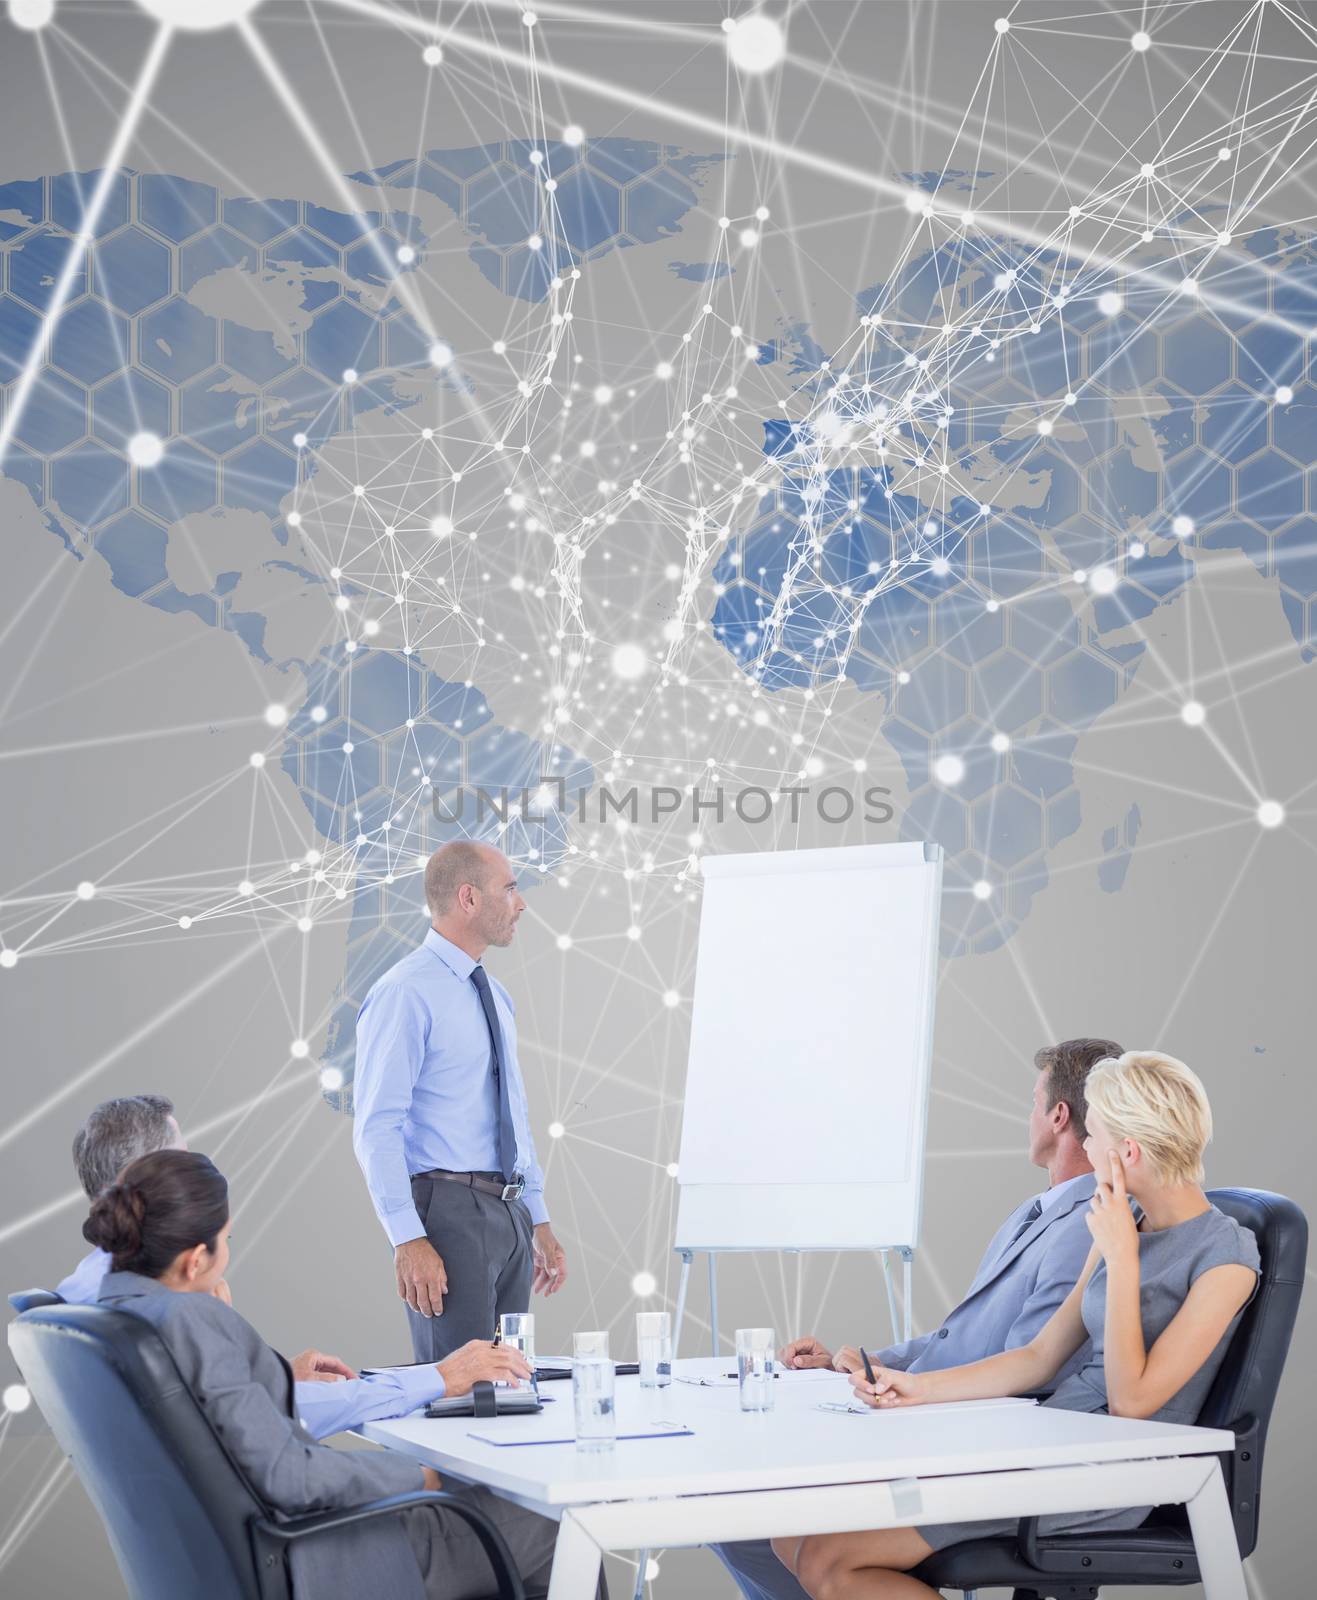 Business people listening during meeting  against background with world map